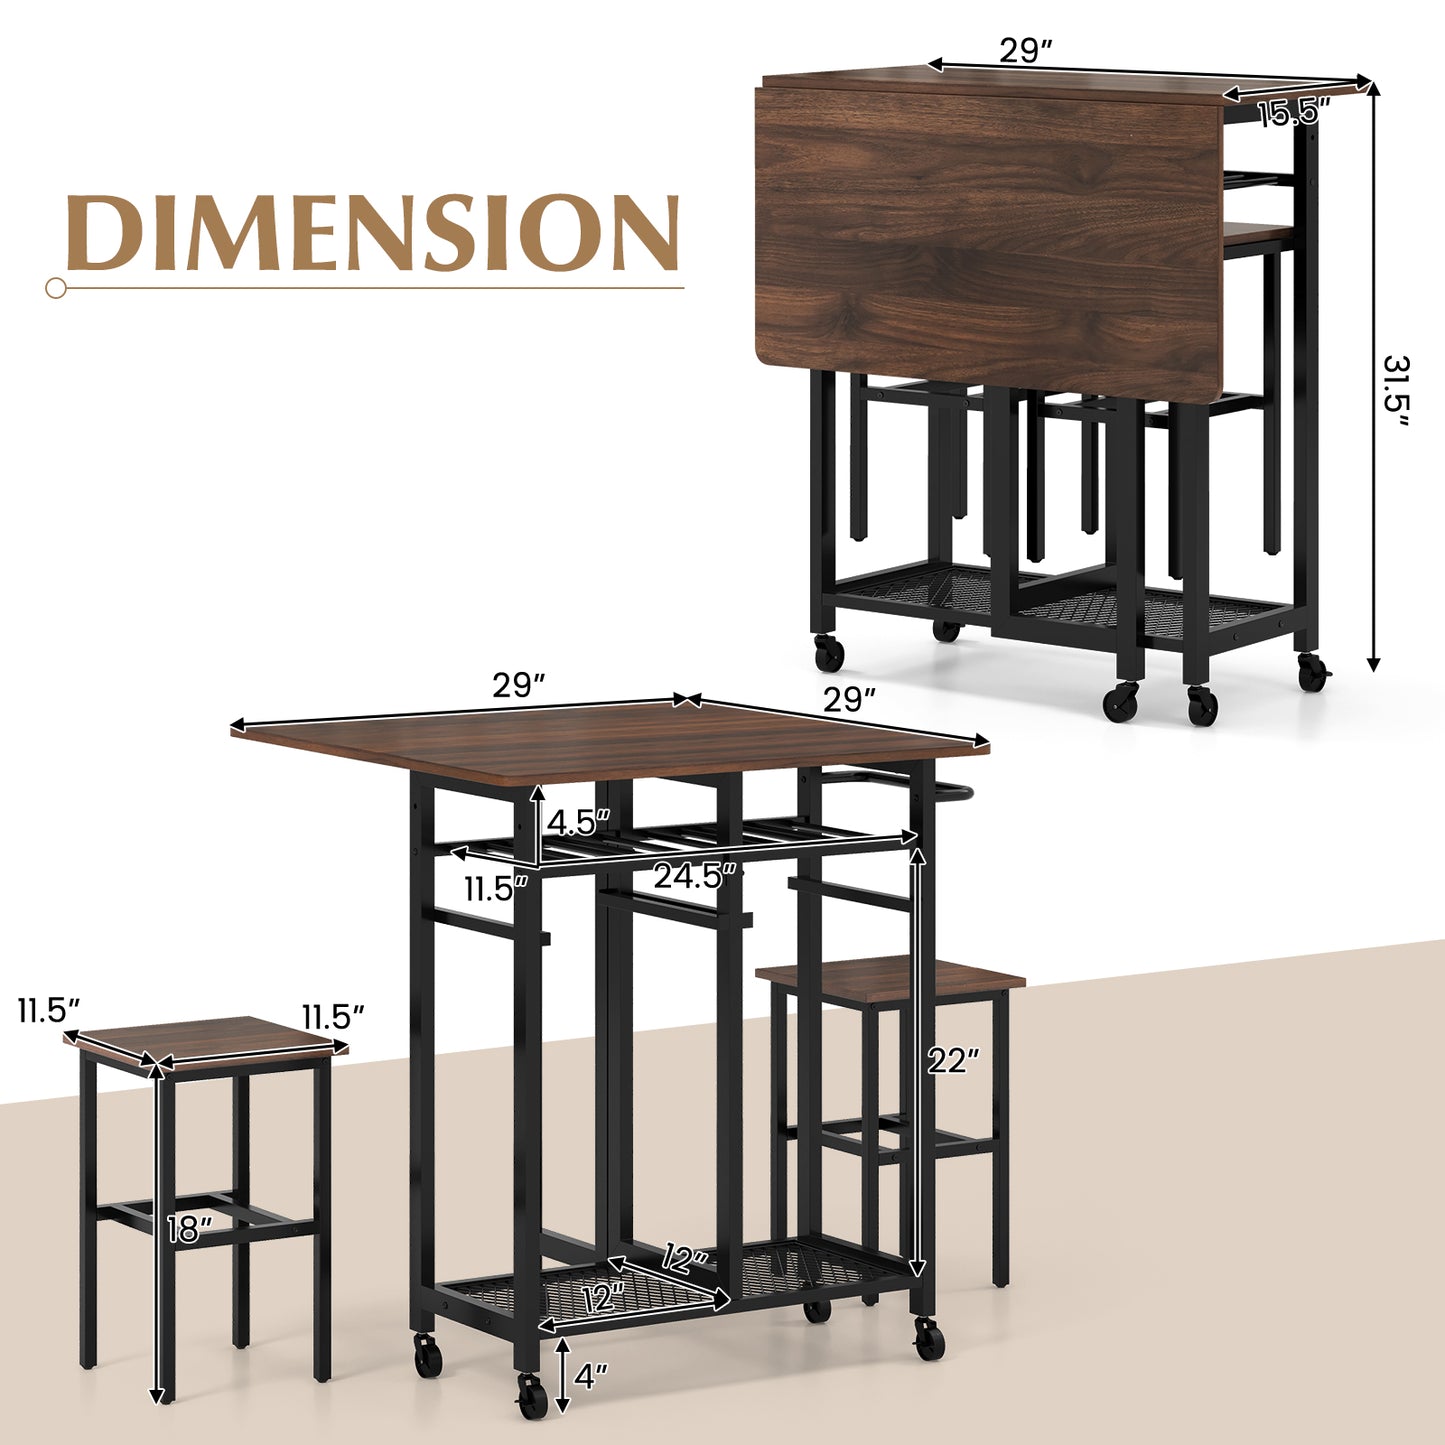 3 Piece Dining Table Set with 6-Bottle Wine Rack-Brown